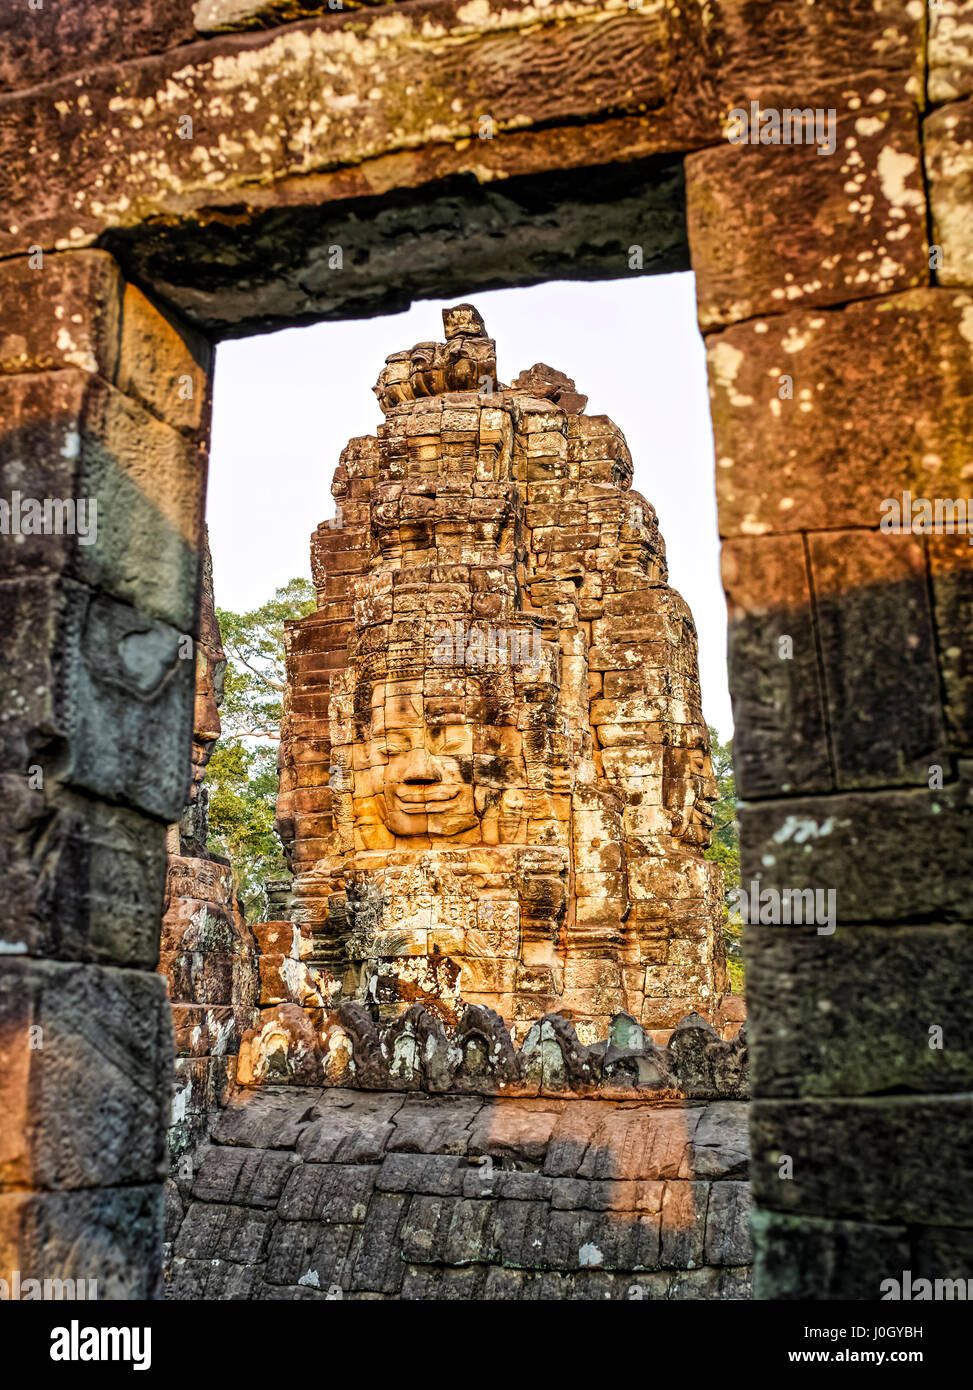 The Bayon is a well-known and richly decorated Khmer temple at Angkor in Cambodia. Built in the late 12th century or early 13th century as the officia Stock Photo